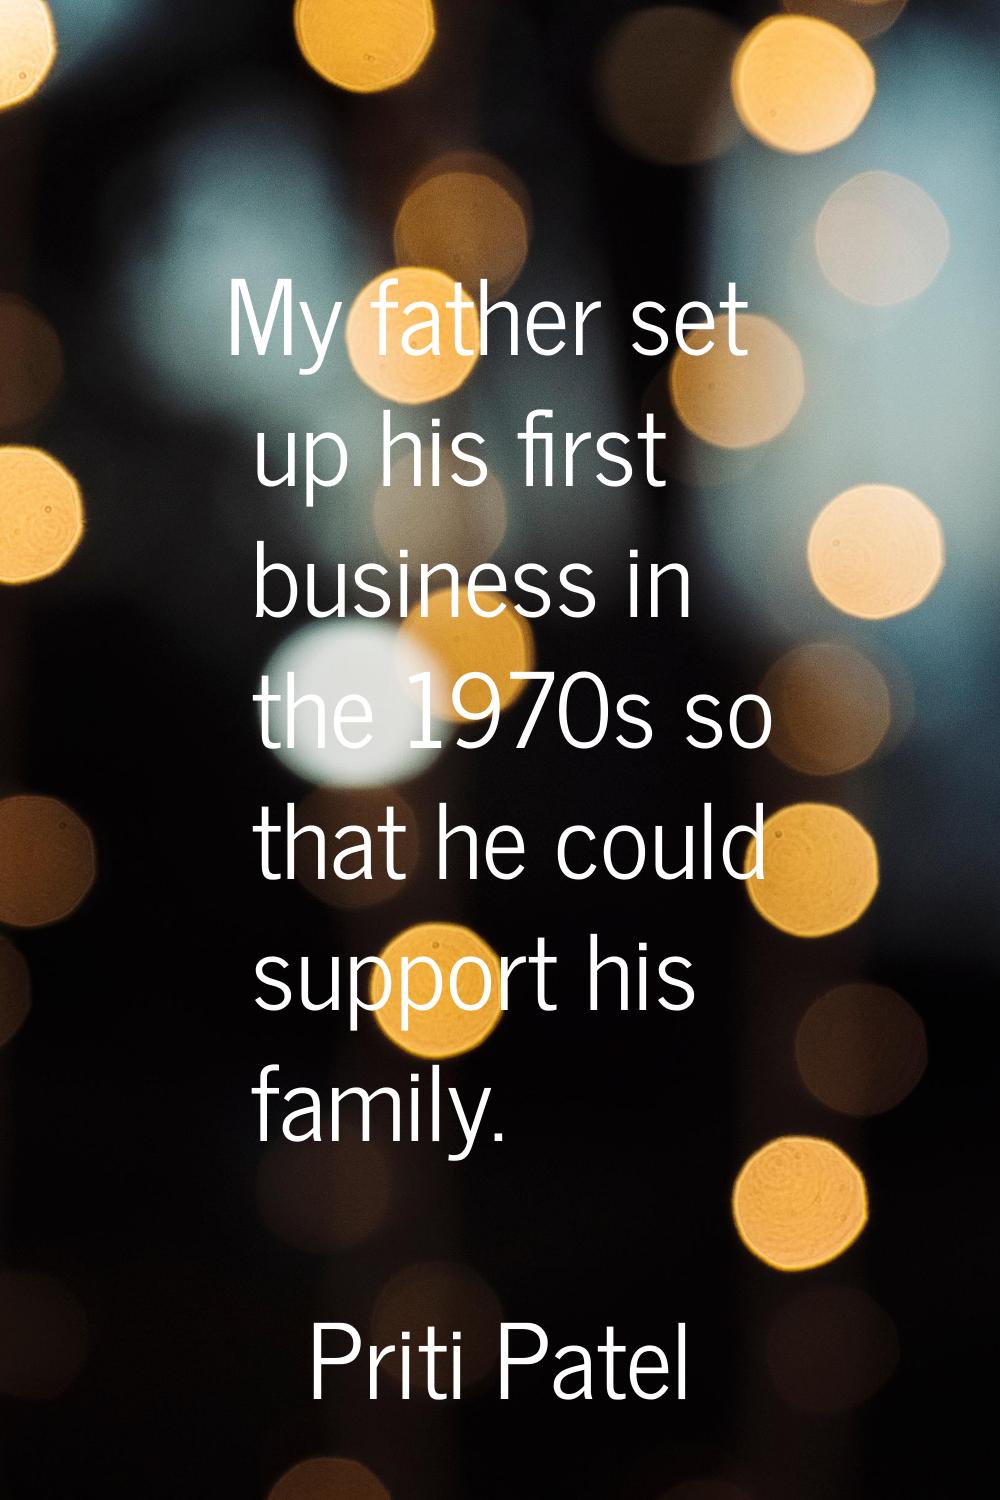 My father set up his first business in the 1970s so that he could support his family.